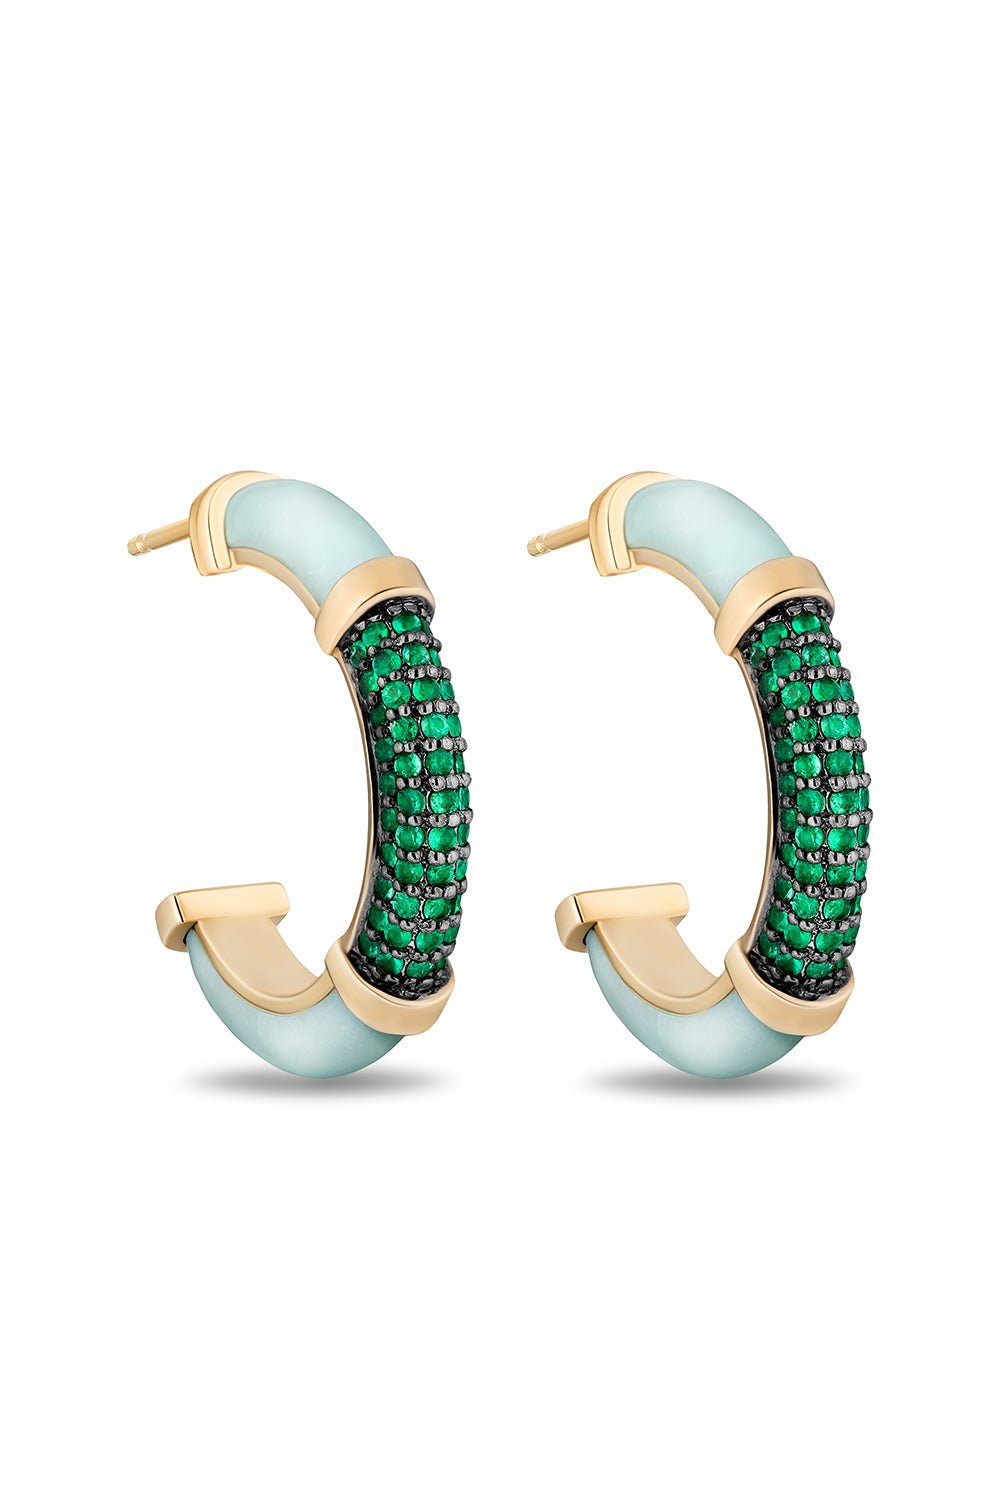 MASON & BOOKS-Sugar and Spice Emerald Hoop Earrings-YELLOW GOLD